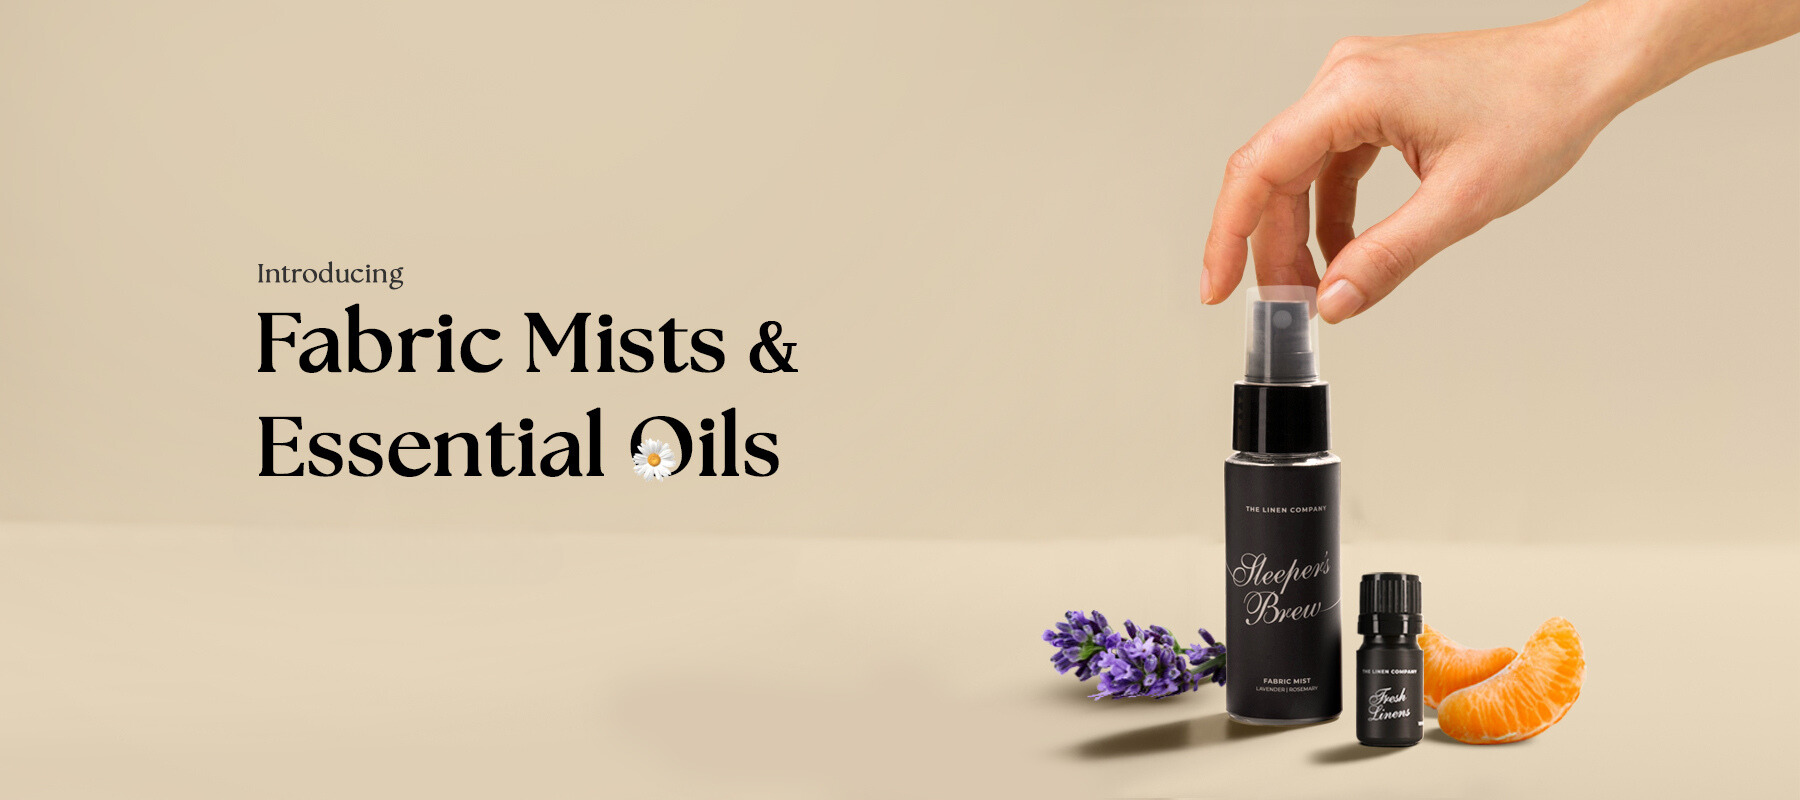 Introducing Home Fragrances: Essential Oils & Fabric Mists